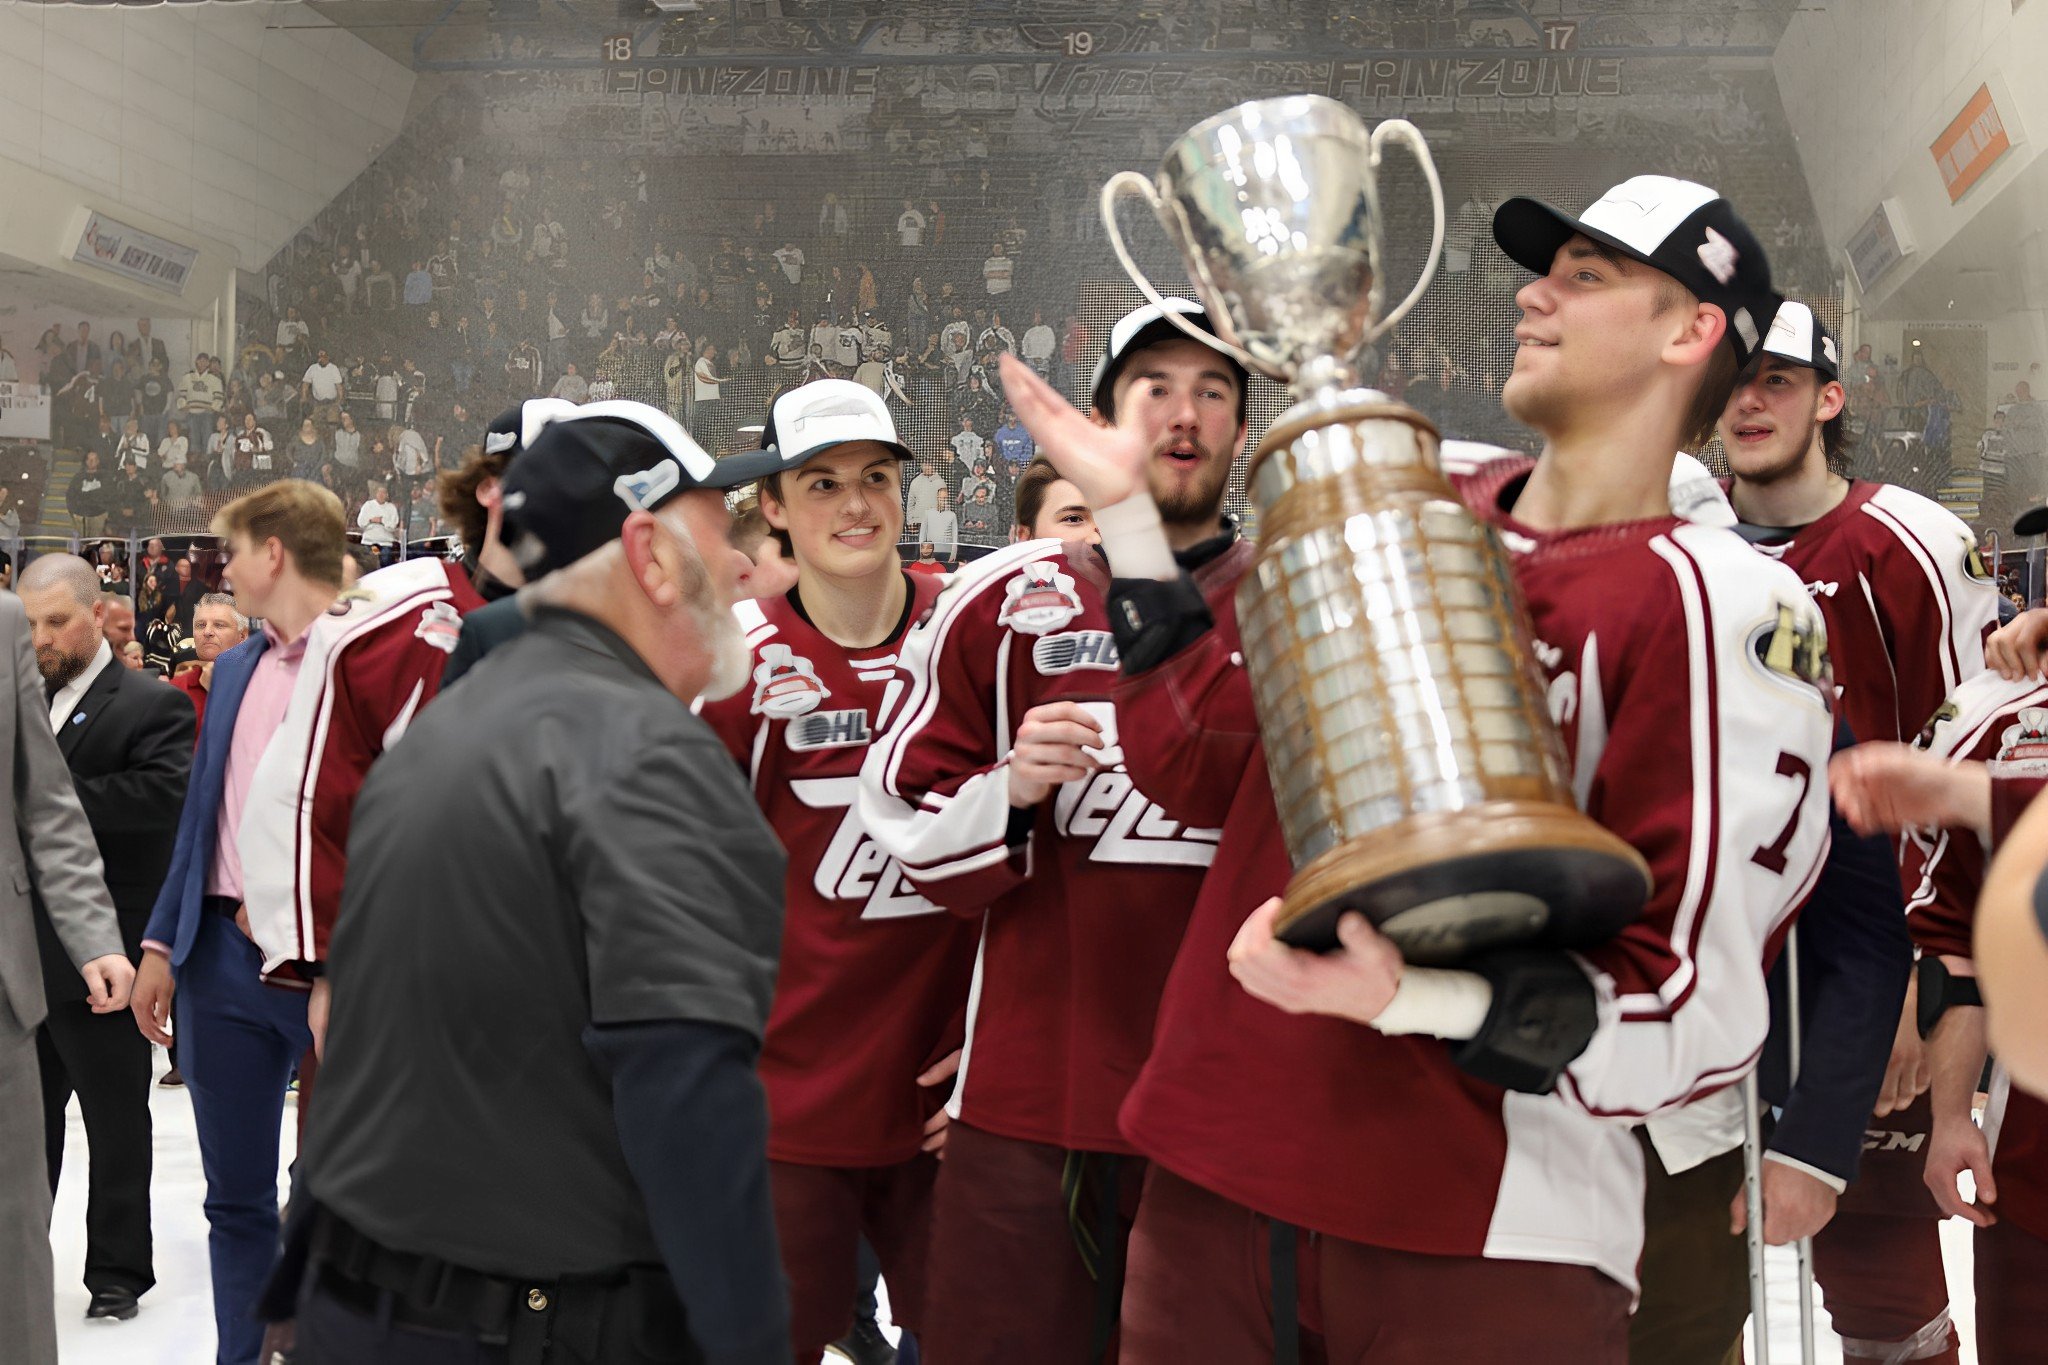 The Petes went 10-1 at home during the playoffs en route to their OHL Championship. All photos by Samantha Bianco.